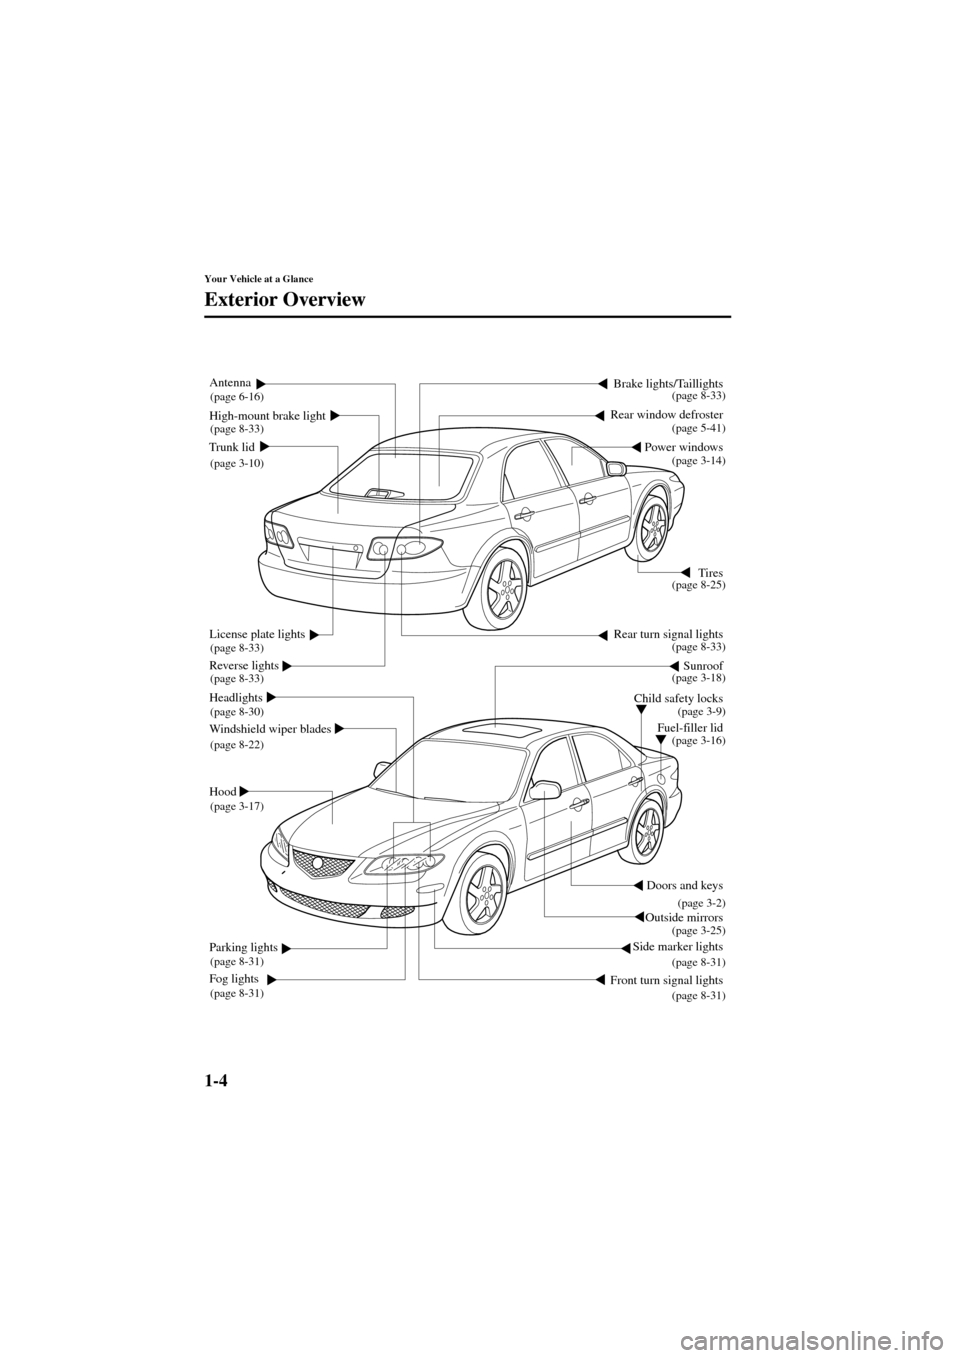 MAZDA MODEL 6 2004   (in English) User Guide 1-4
Your Vehicle at a Glance
Form No. 8R29-EA-02I
Exterior Overview
Doors and keys
Outside mirrors Headlights
Fuel-filler lid Child safety locksTires
Reverse lights
Windshield wiper blades
Hood
Front 